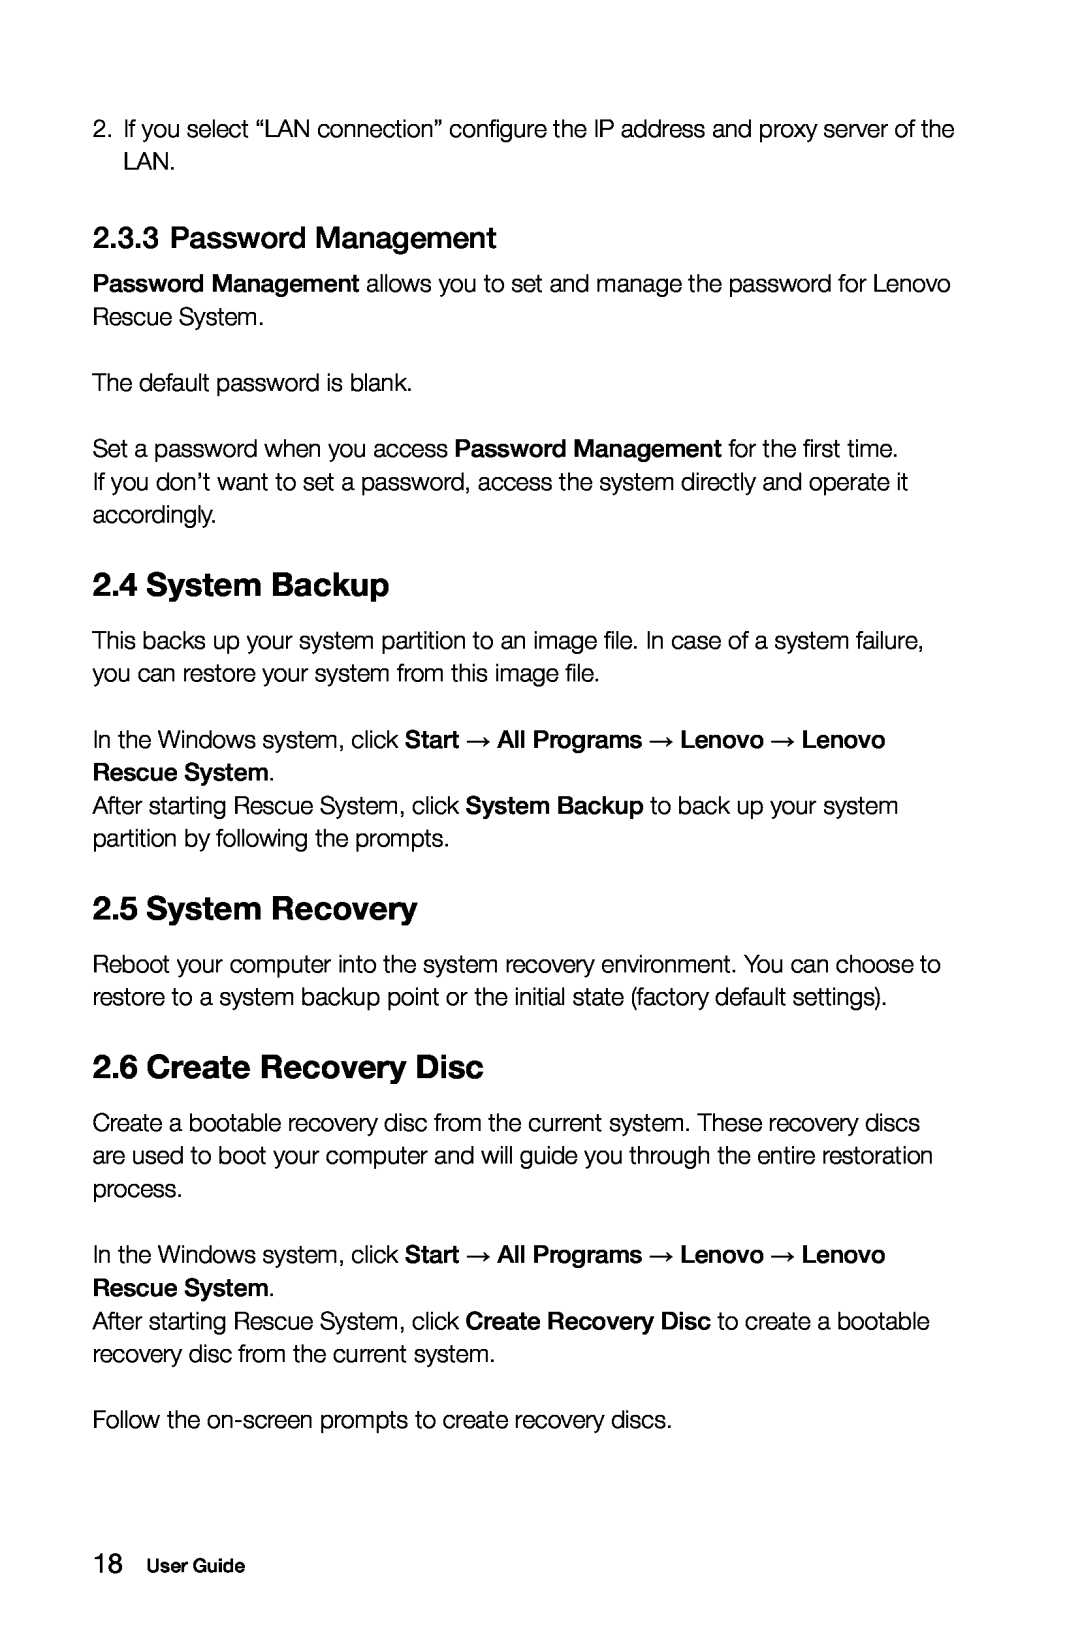 Lenovo 10080/3099/1194, 10091/2558/1196 manual System Backup, System Recovery, Create Recovery Disc, Password Management 